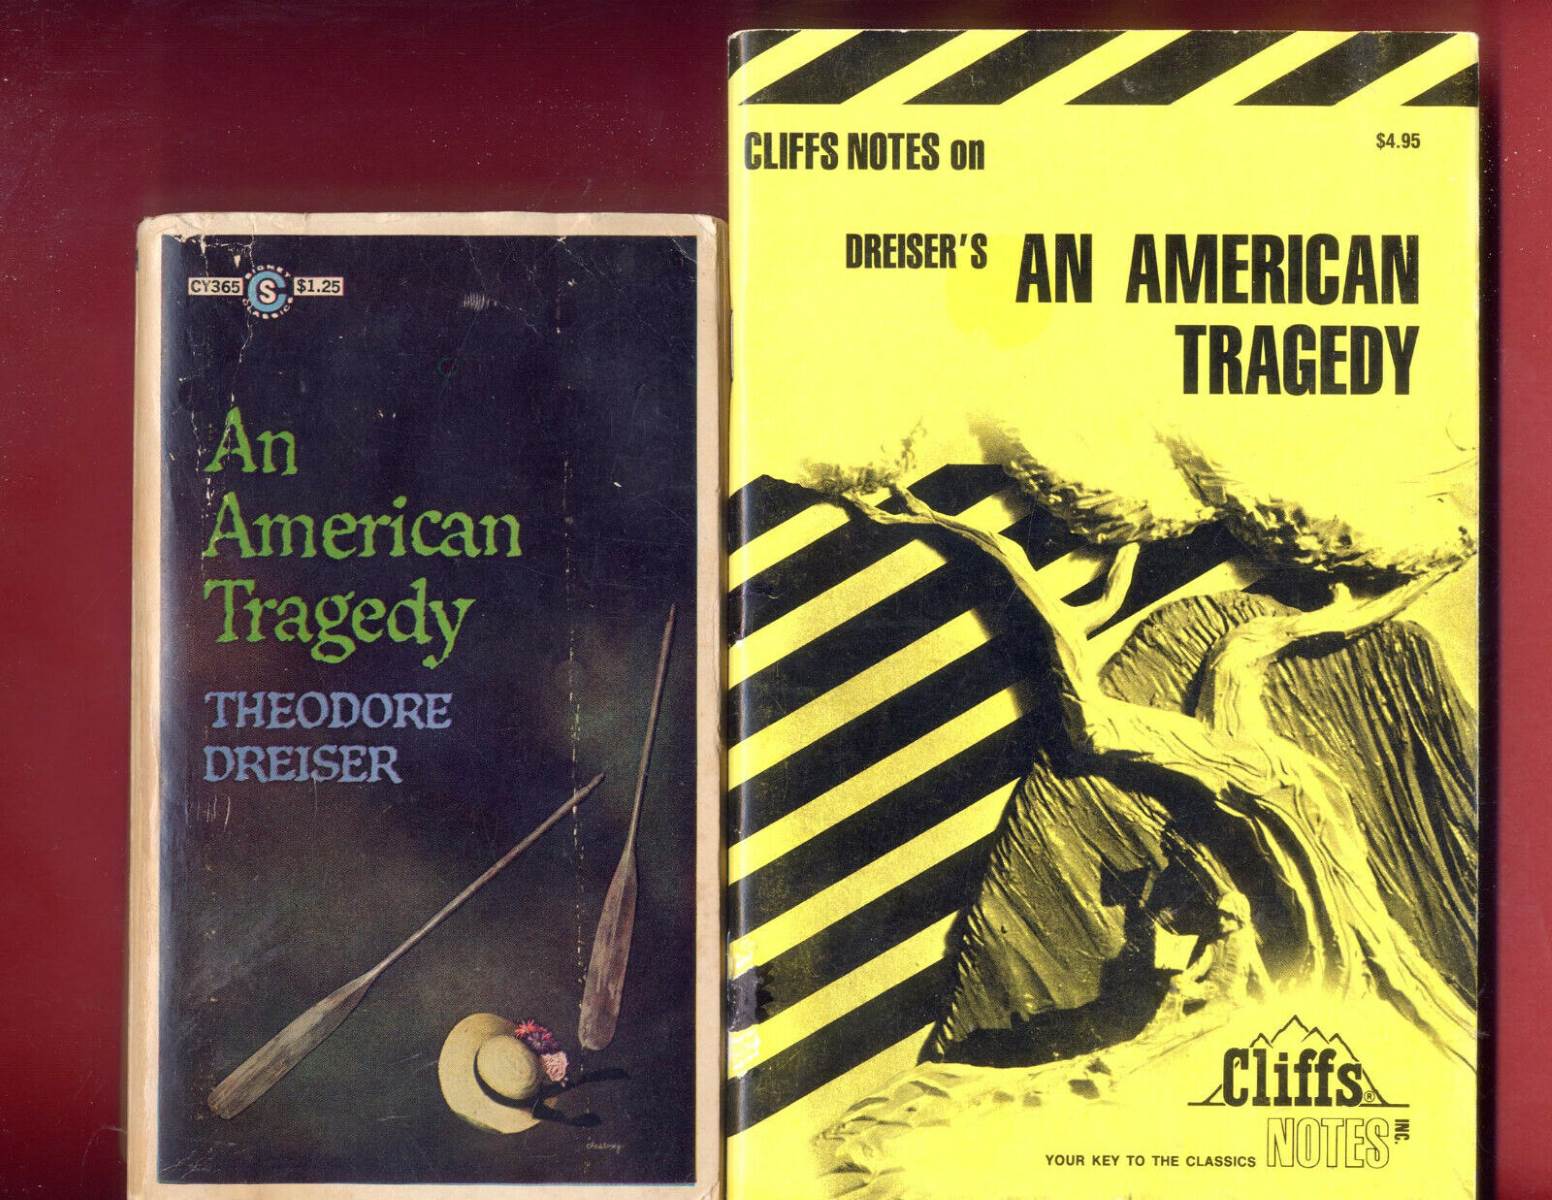 20-captivating-facts-about-an-american-tragedy-theodore-dreiser